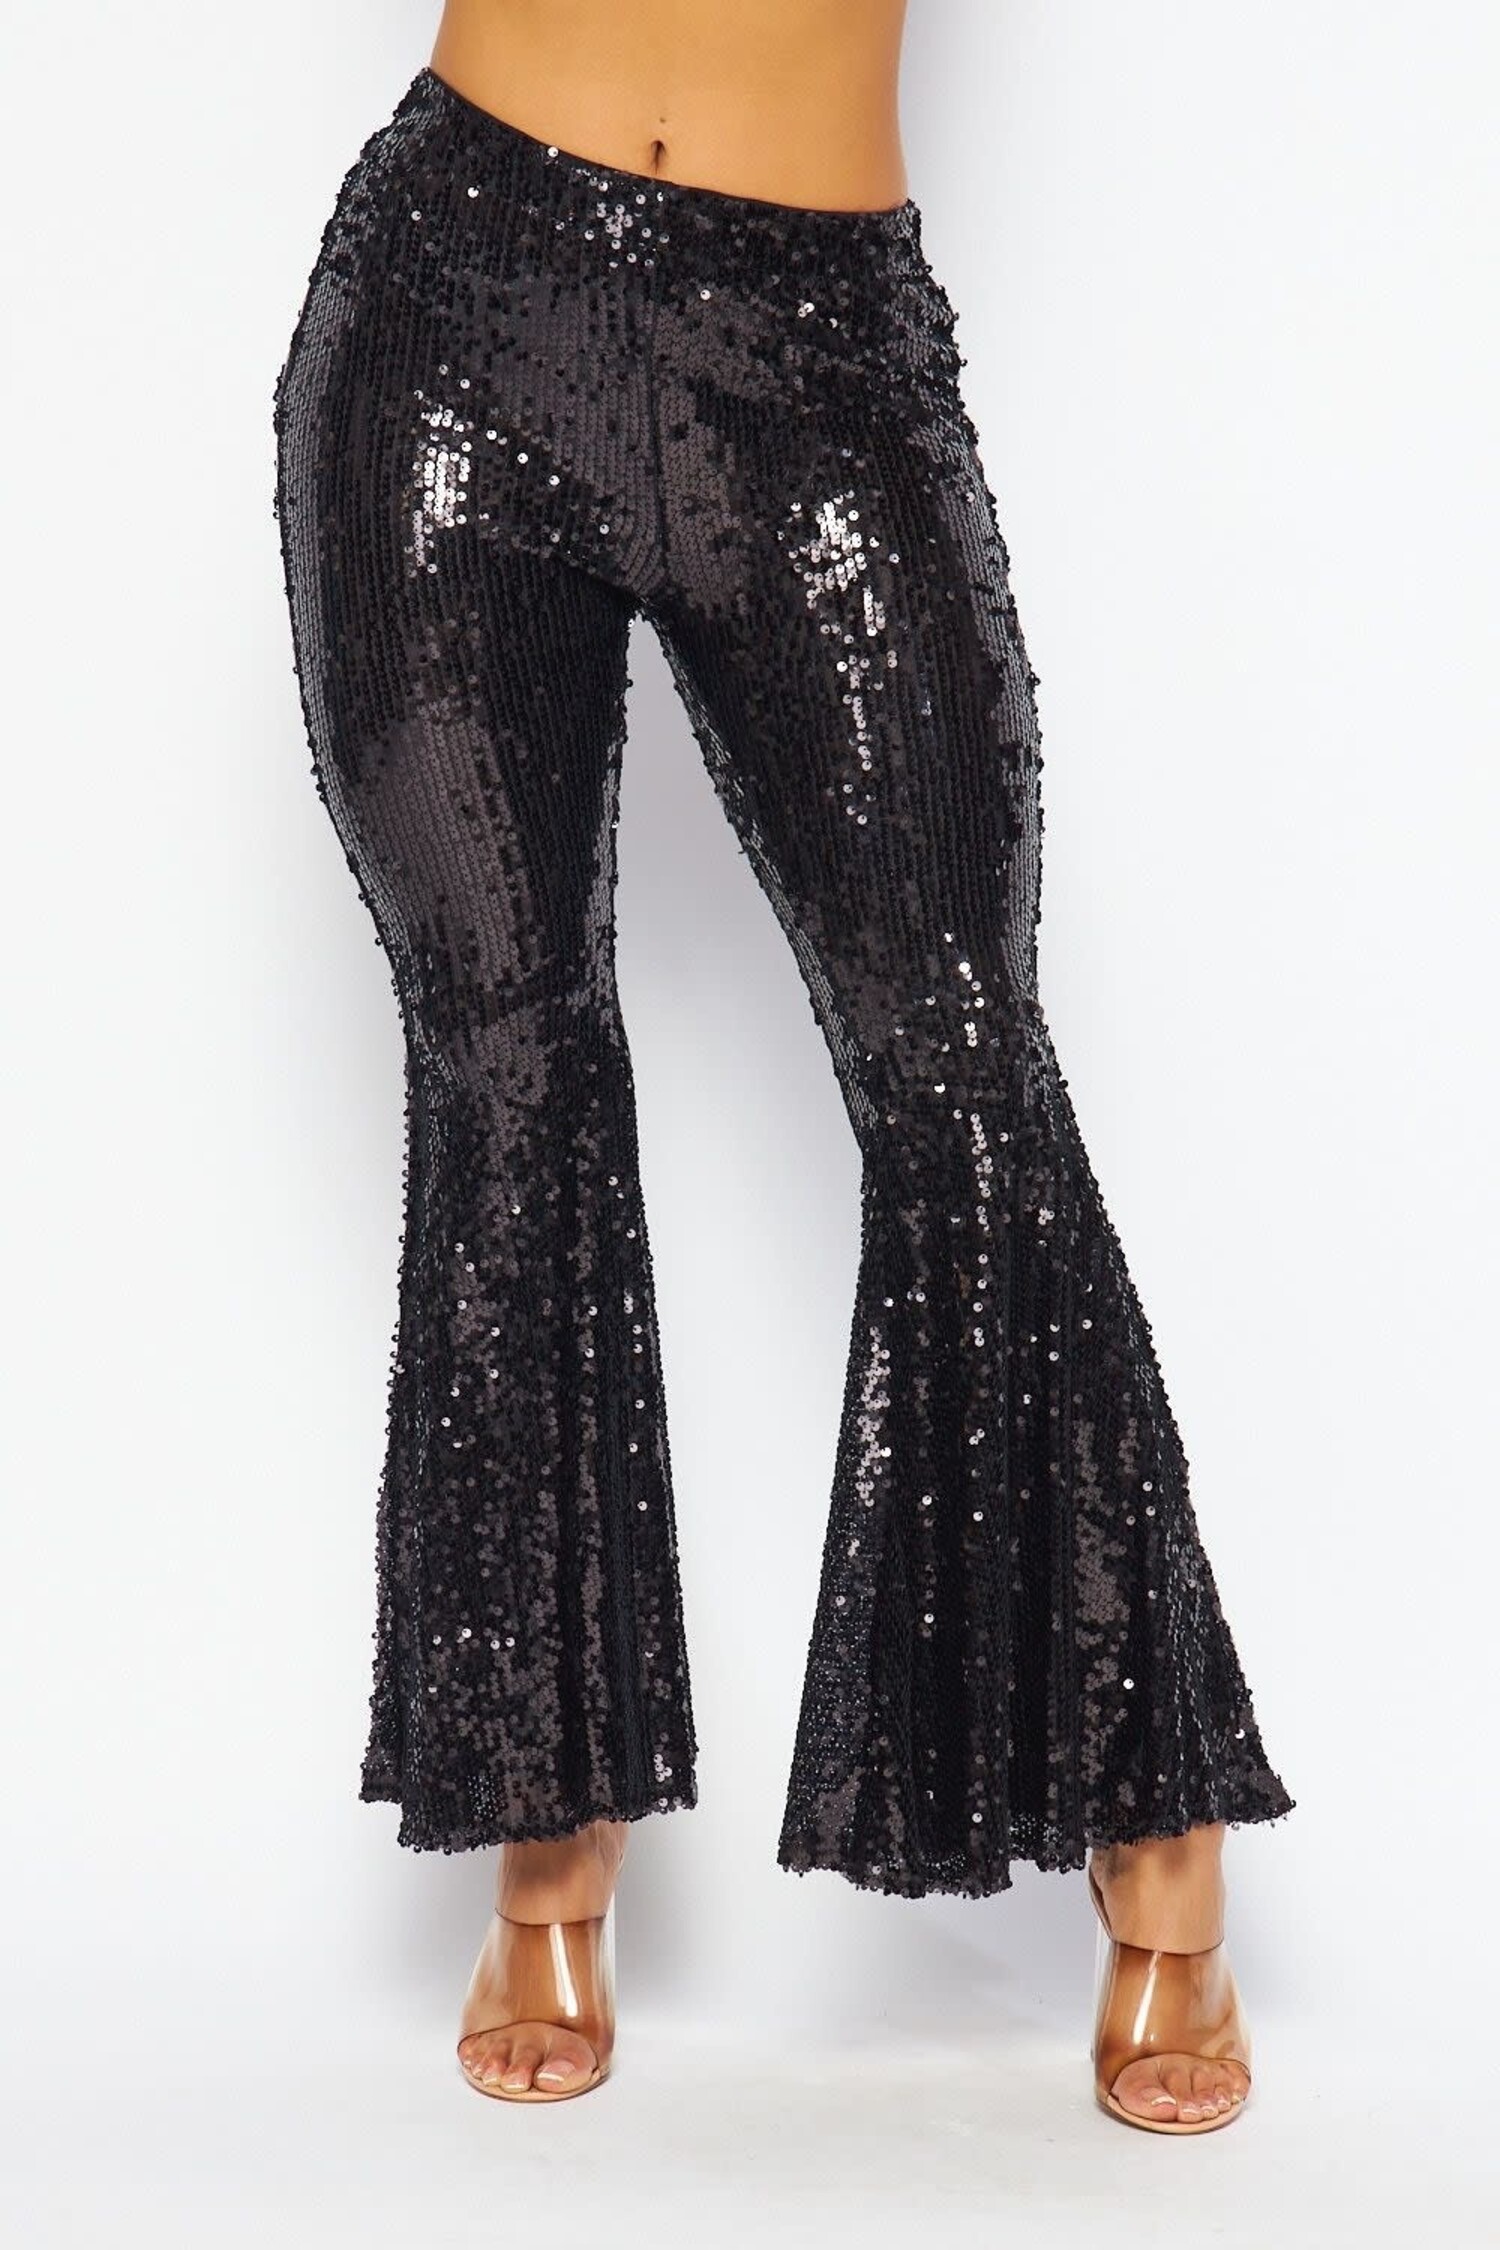 Sparkling Sequin High Waist Bell Bottoms For Women Glittery Wide Leg  Palazzo Sequin Flared Trousers For Disco Night Club From Luolinko, $13.22 |  DHgate.Com